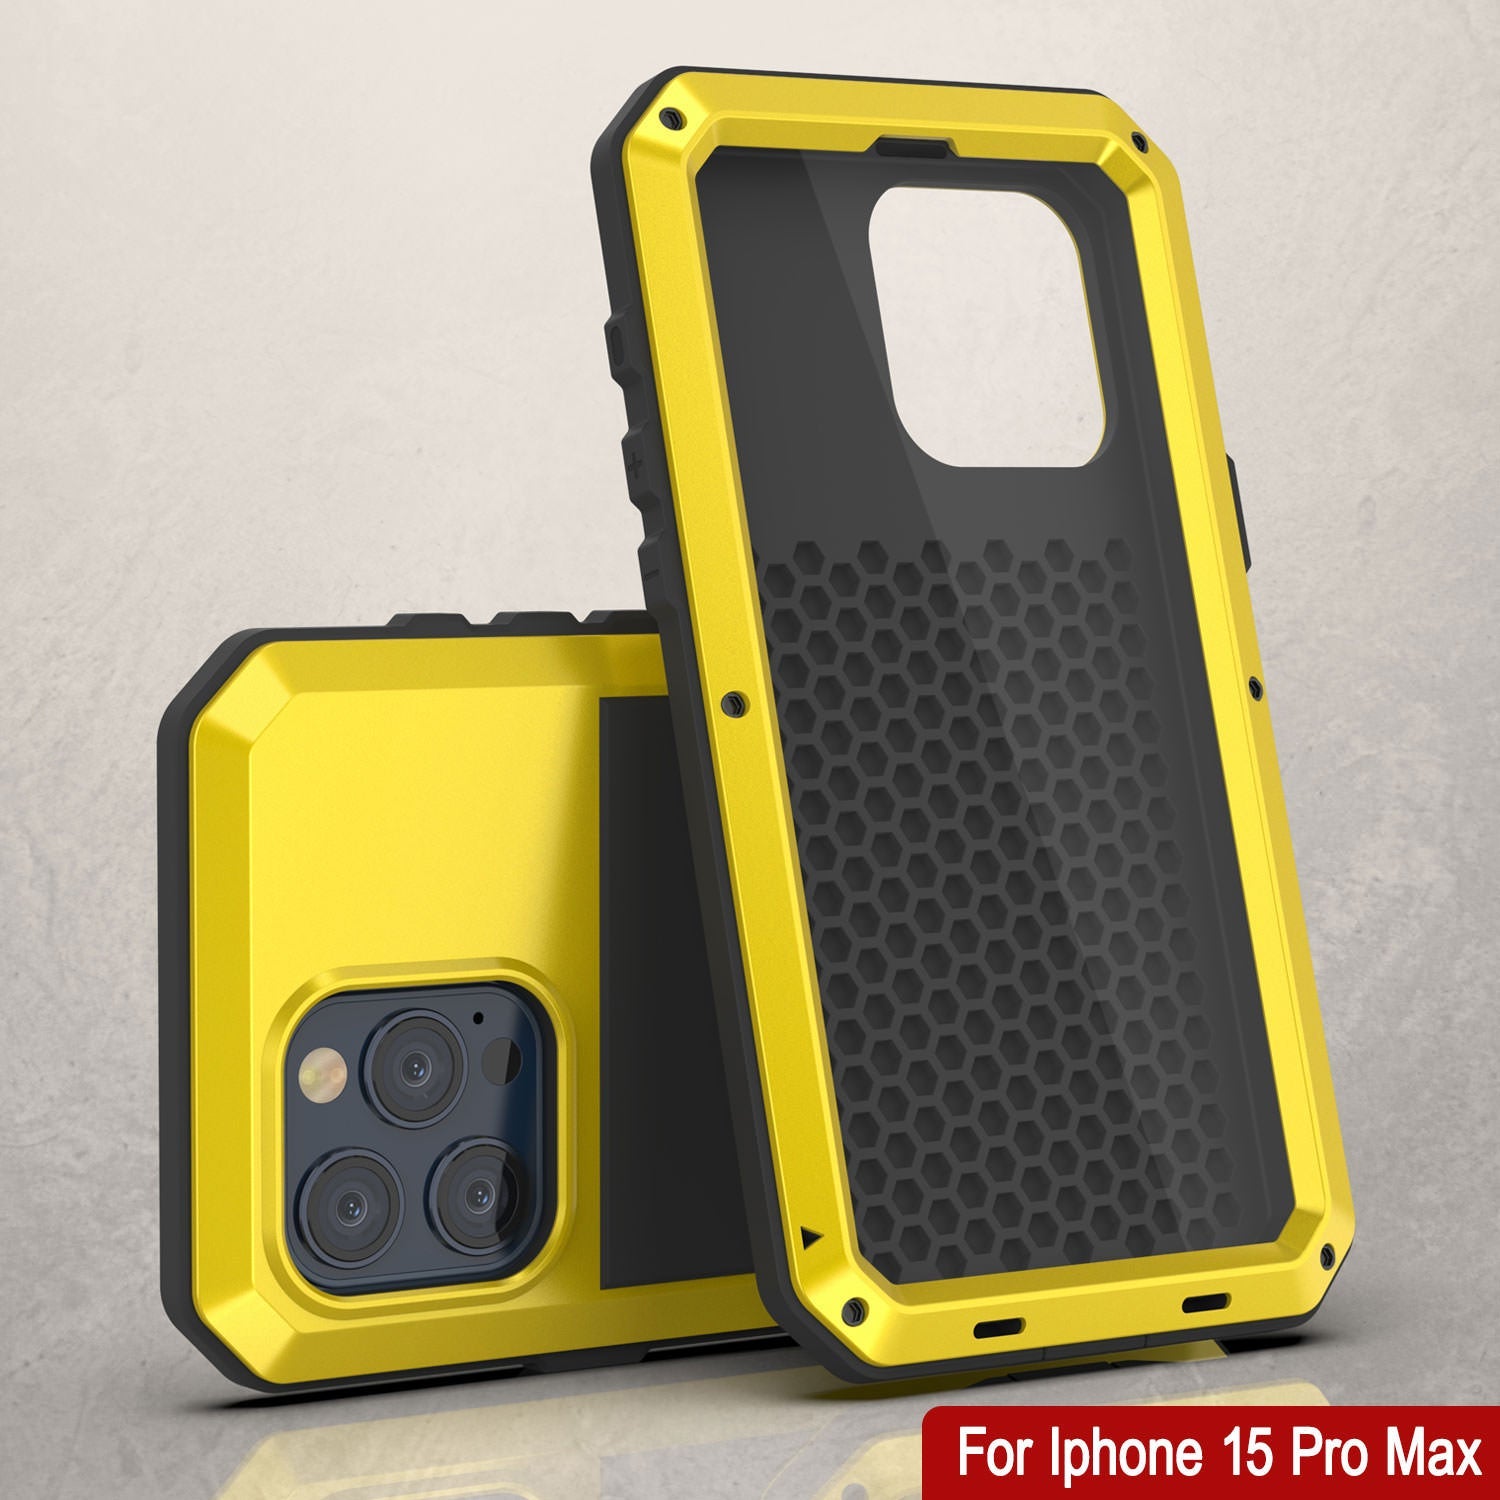 iPhone 15 Pro Max Metal Case, Heavy Duty Military Grade Armor Cover [shock proof] Full Body Hard [Yellow]